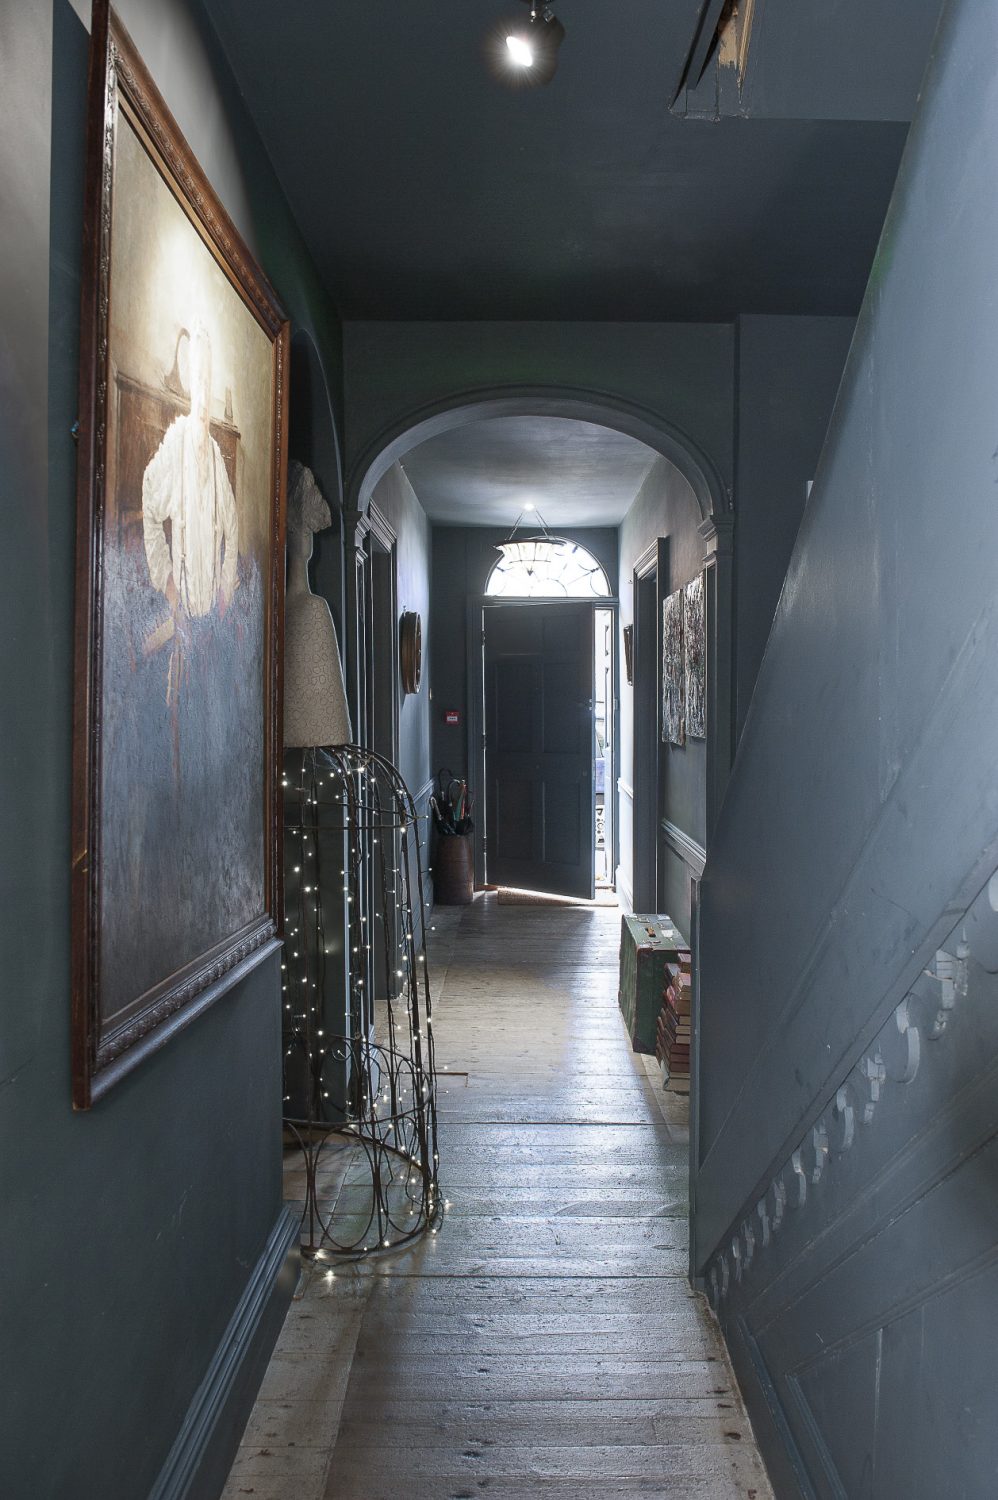 The grey-painted hallway is naturally lit by an original fanlight window above the front door as well as more contemporary fairy lights and spots